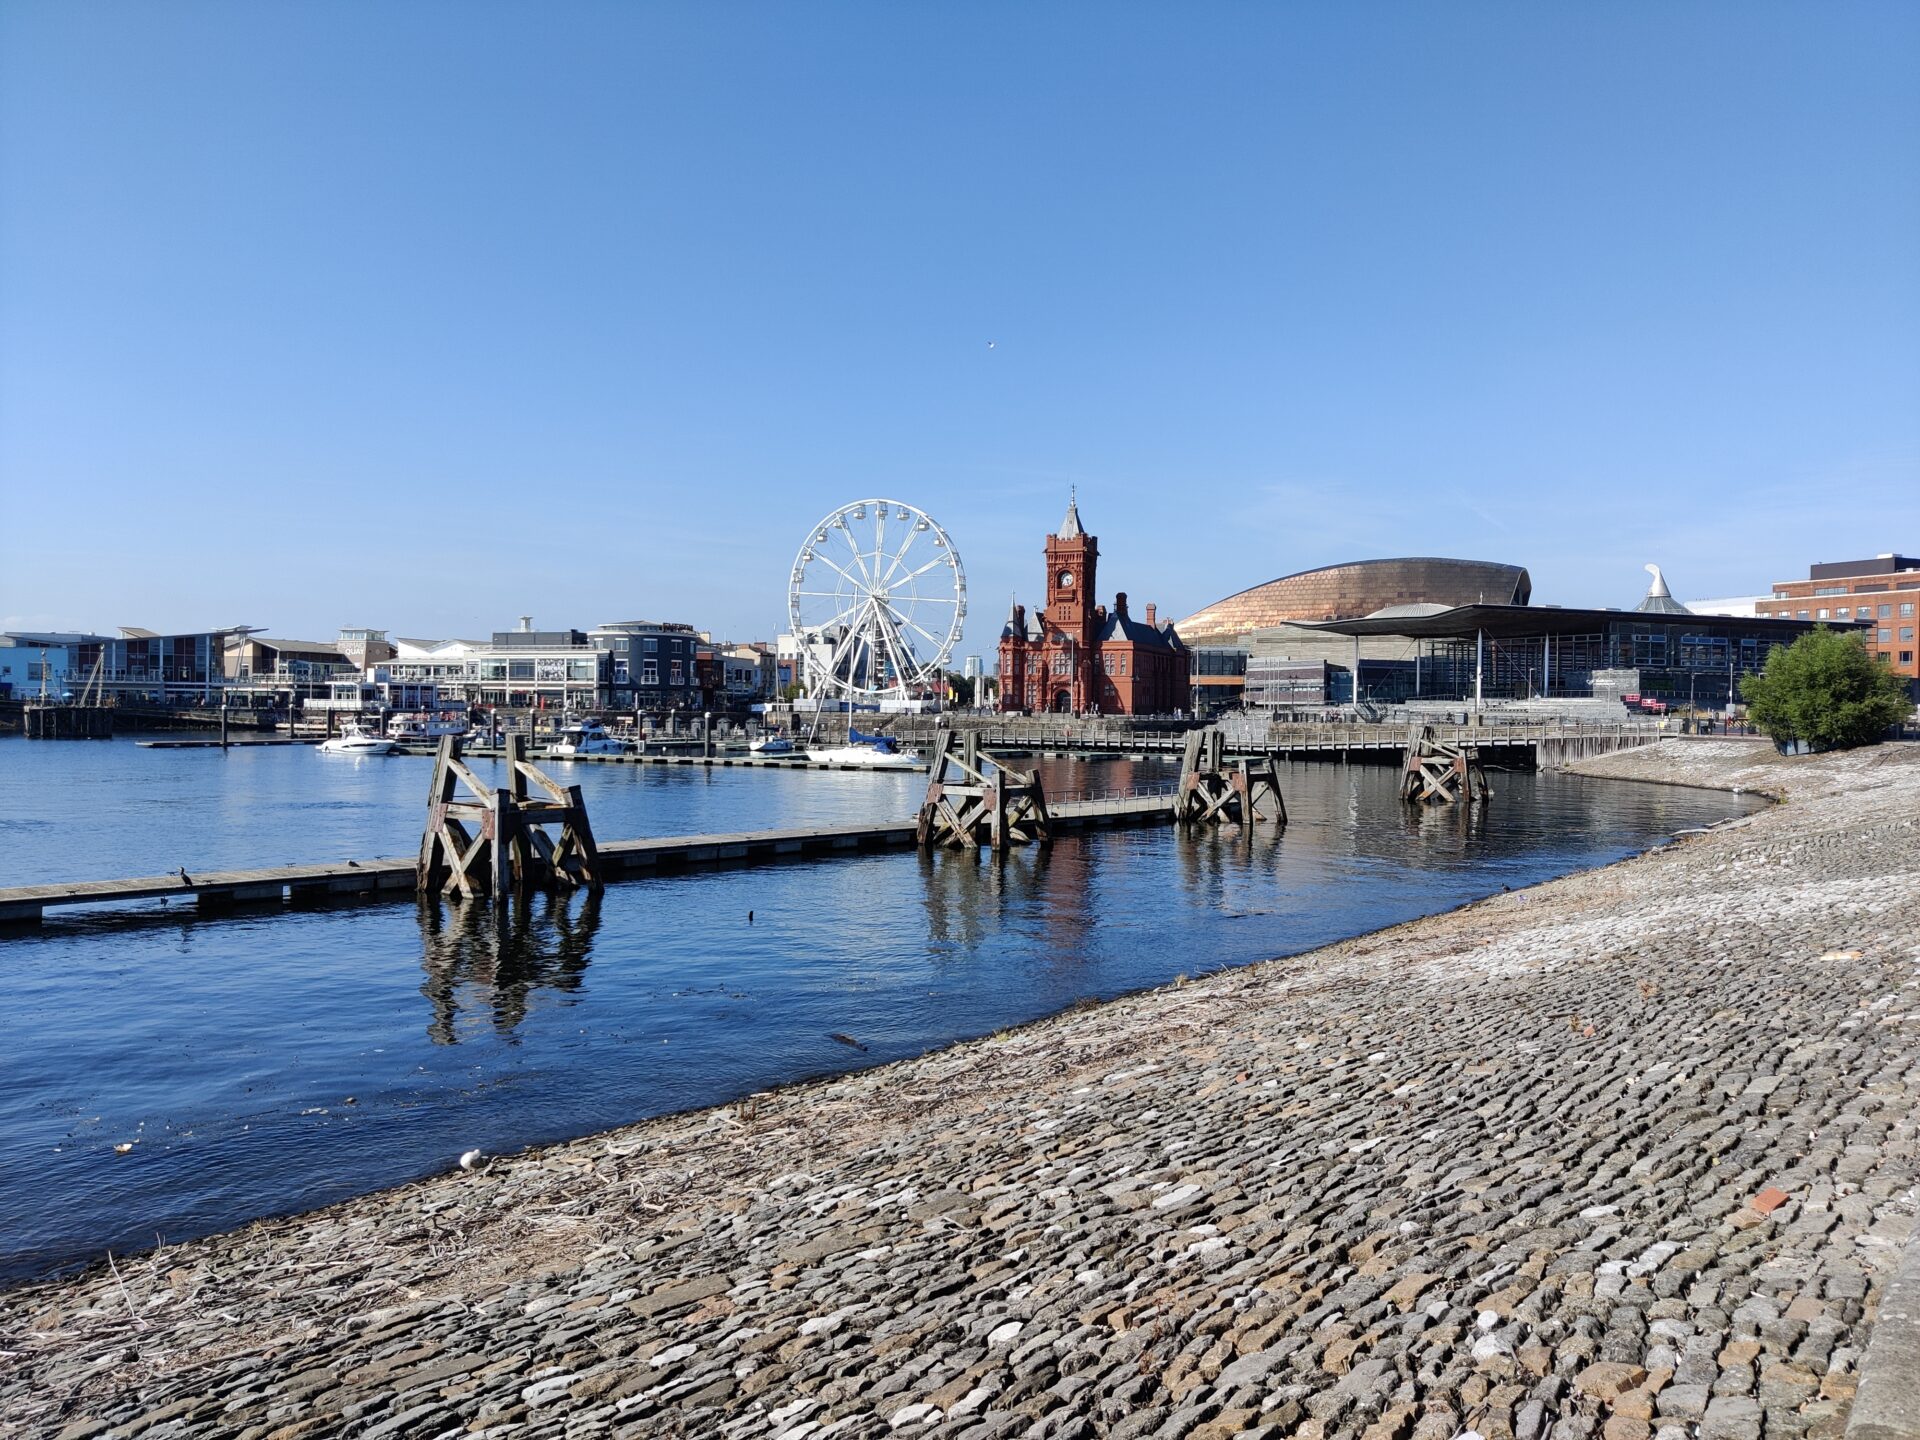 A blue sunny day at Cardiff Bay, overlooking some of the top attractions in Cardiff Bay